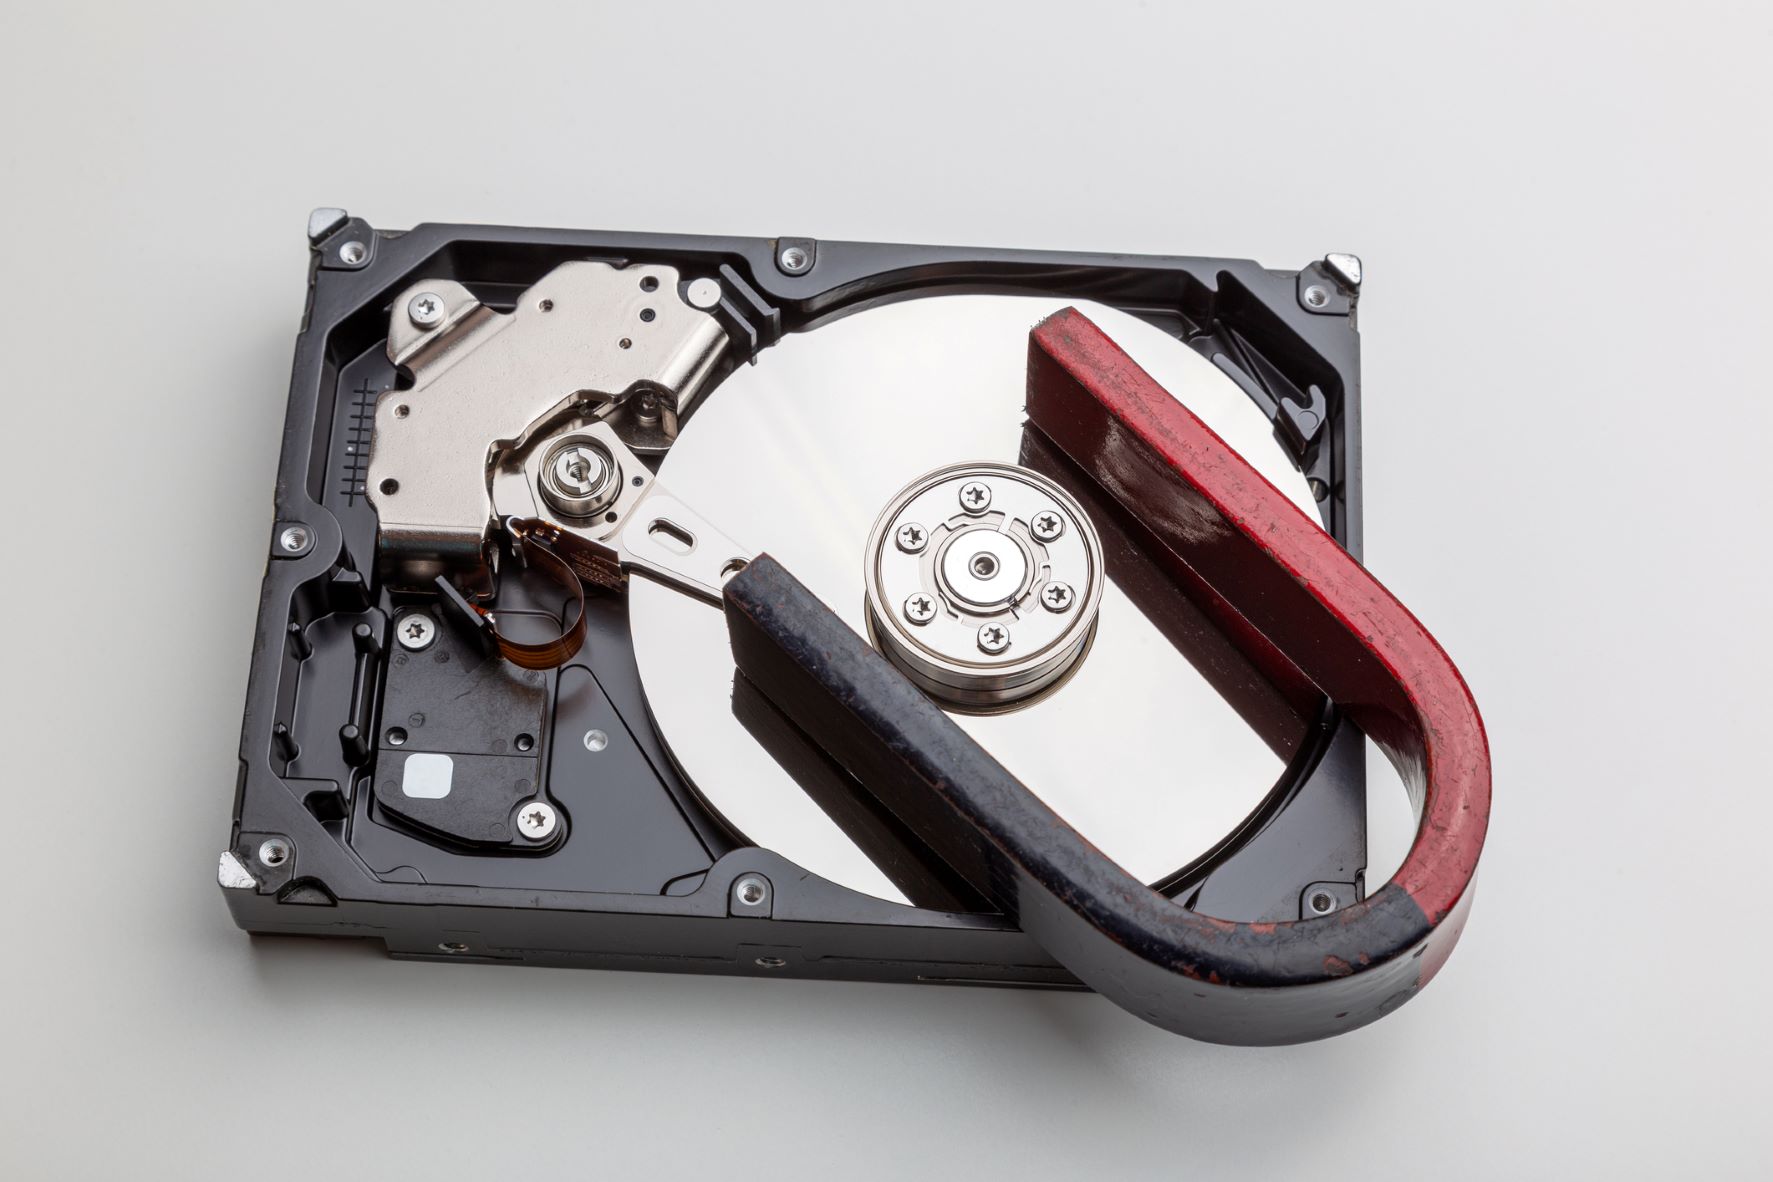 How to Wipe Your Hard Drive